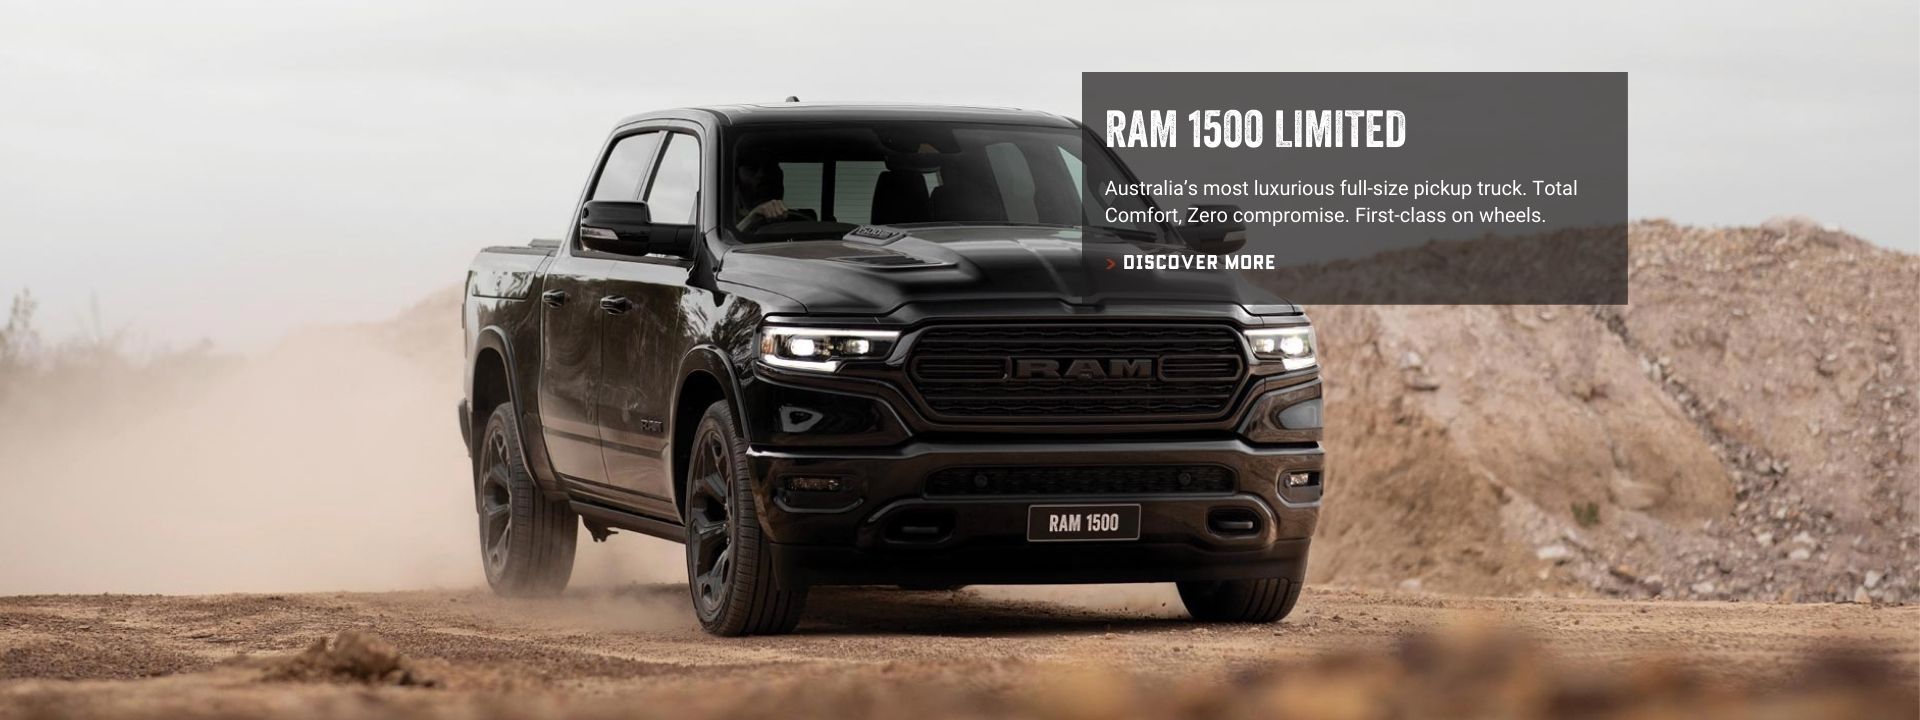 All-New Ram 1500 Limited. Book a Test Drive.